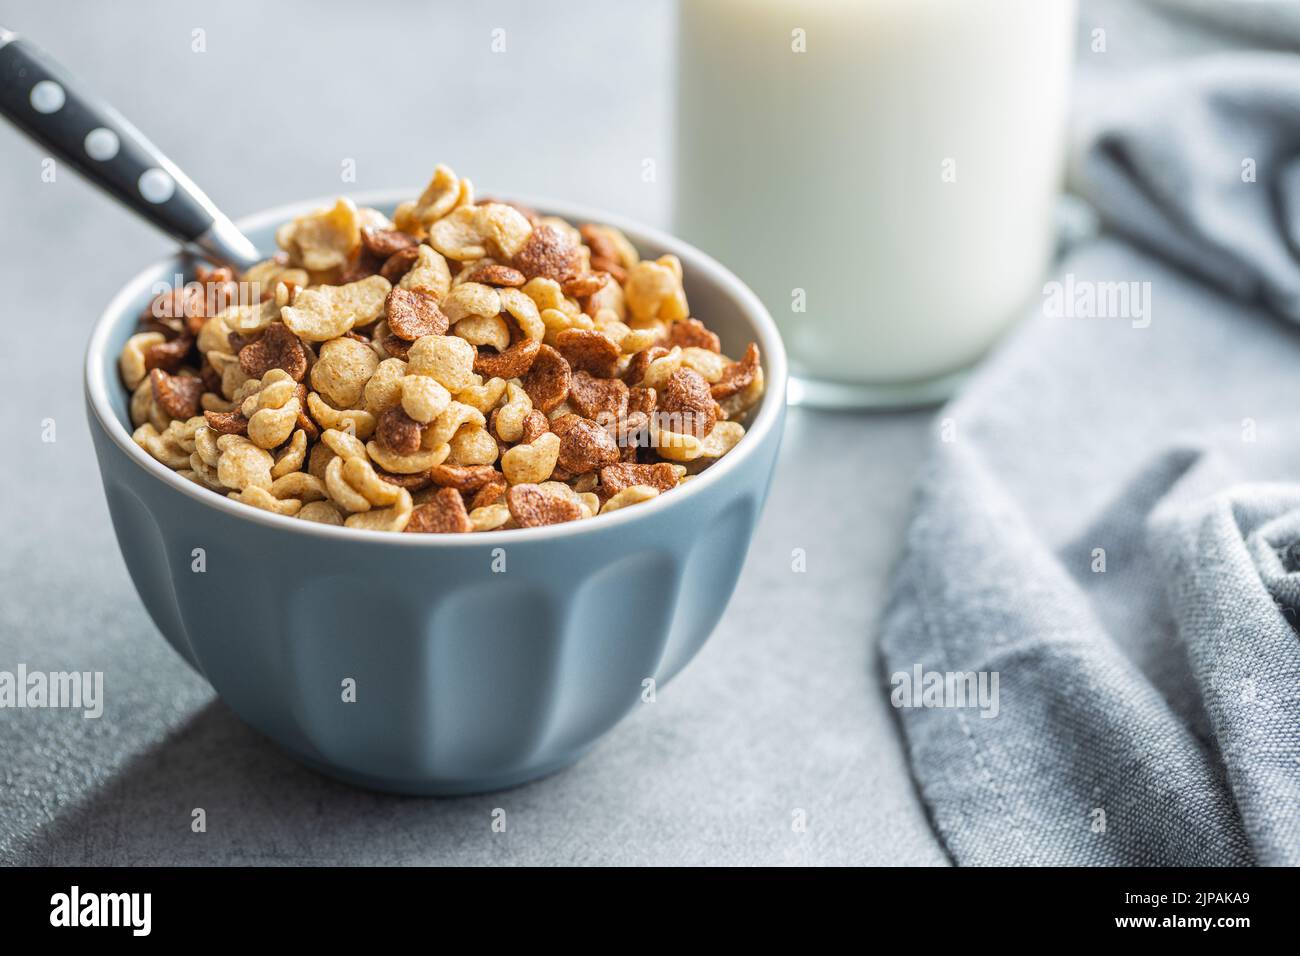 Breakfast cereal flakes in a bowl on kitchen table. Stock Photo